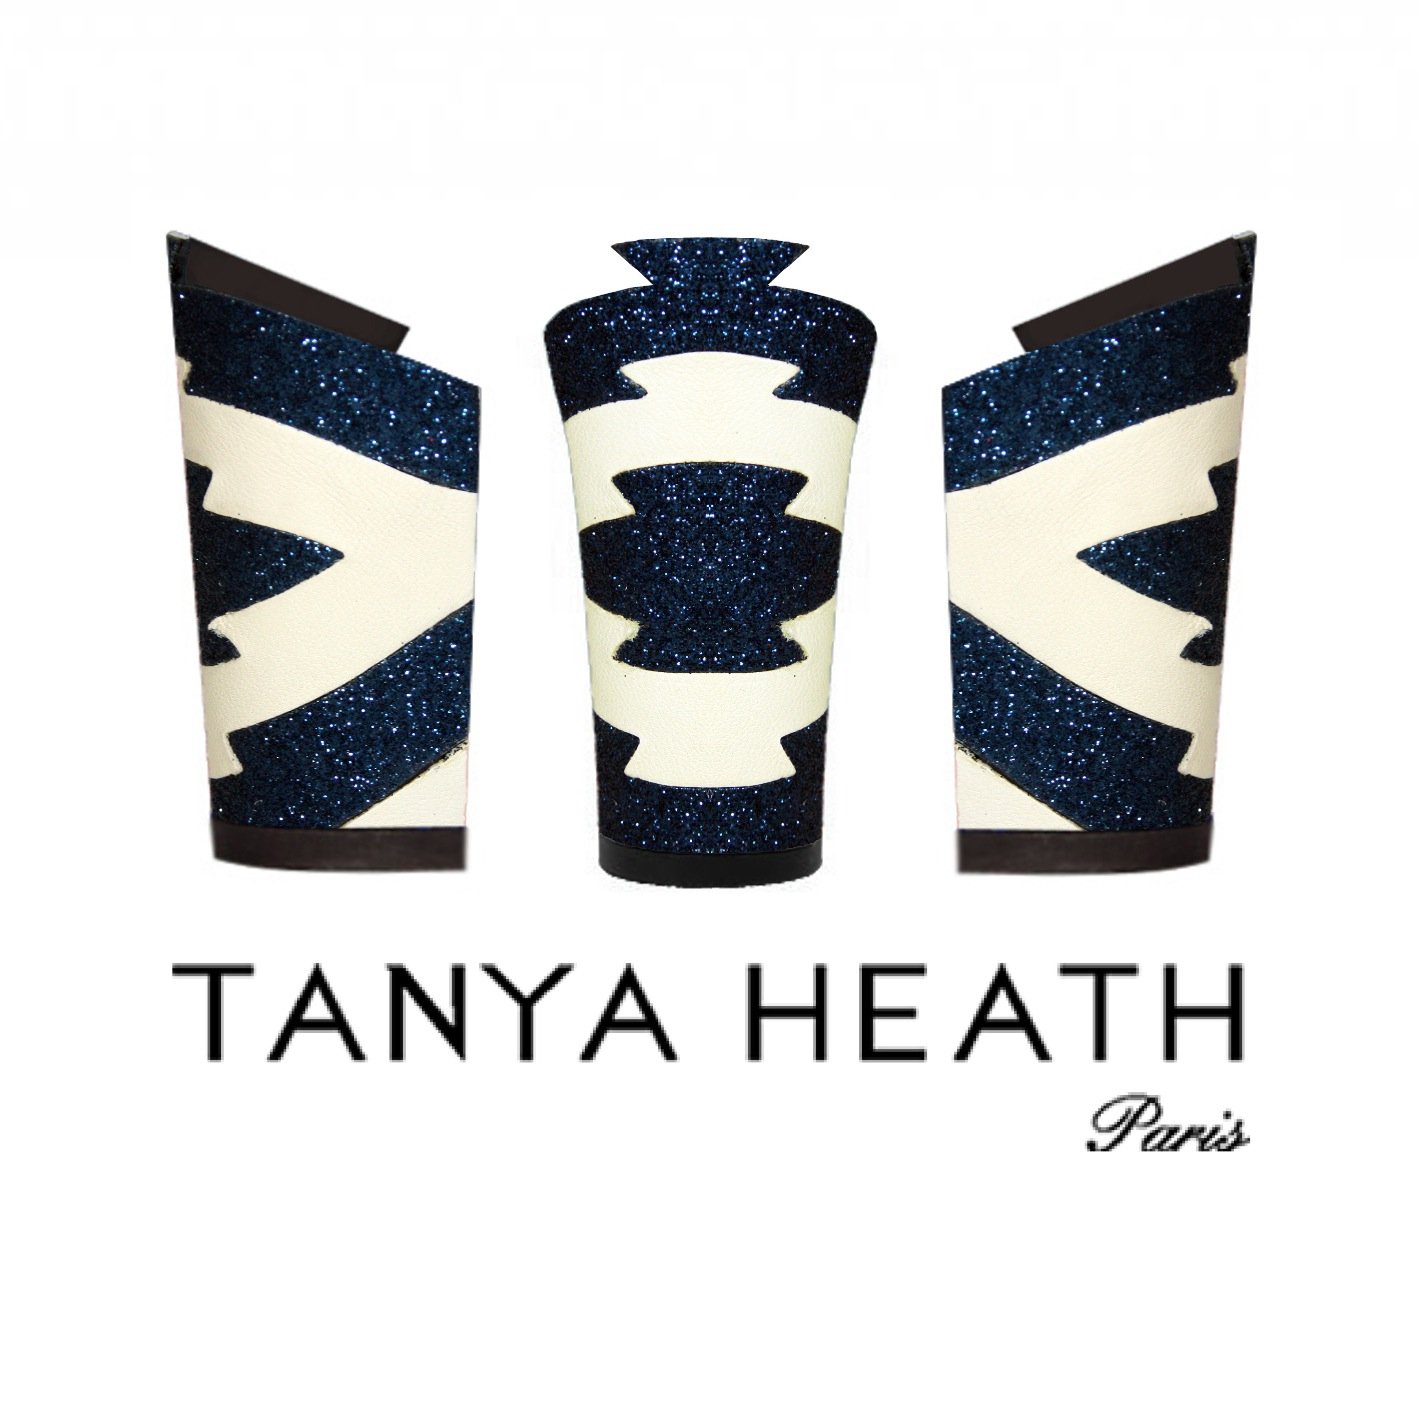 TANYA HEATH Paris offers a unique range of shoes with interchangeable heels. You can change from high to low heels with a click of a button. Shop online today!